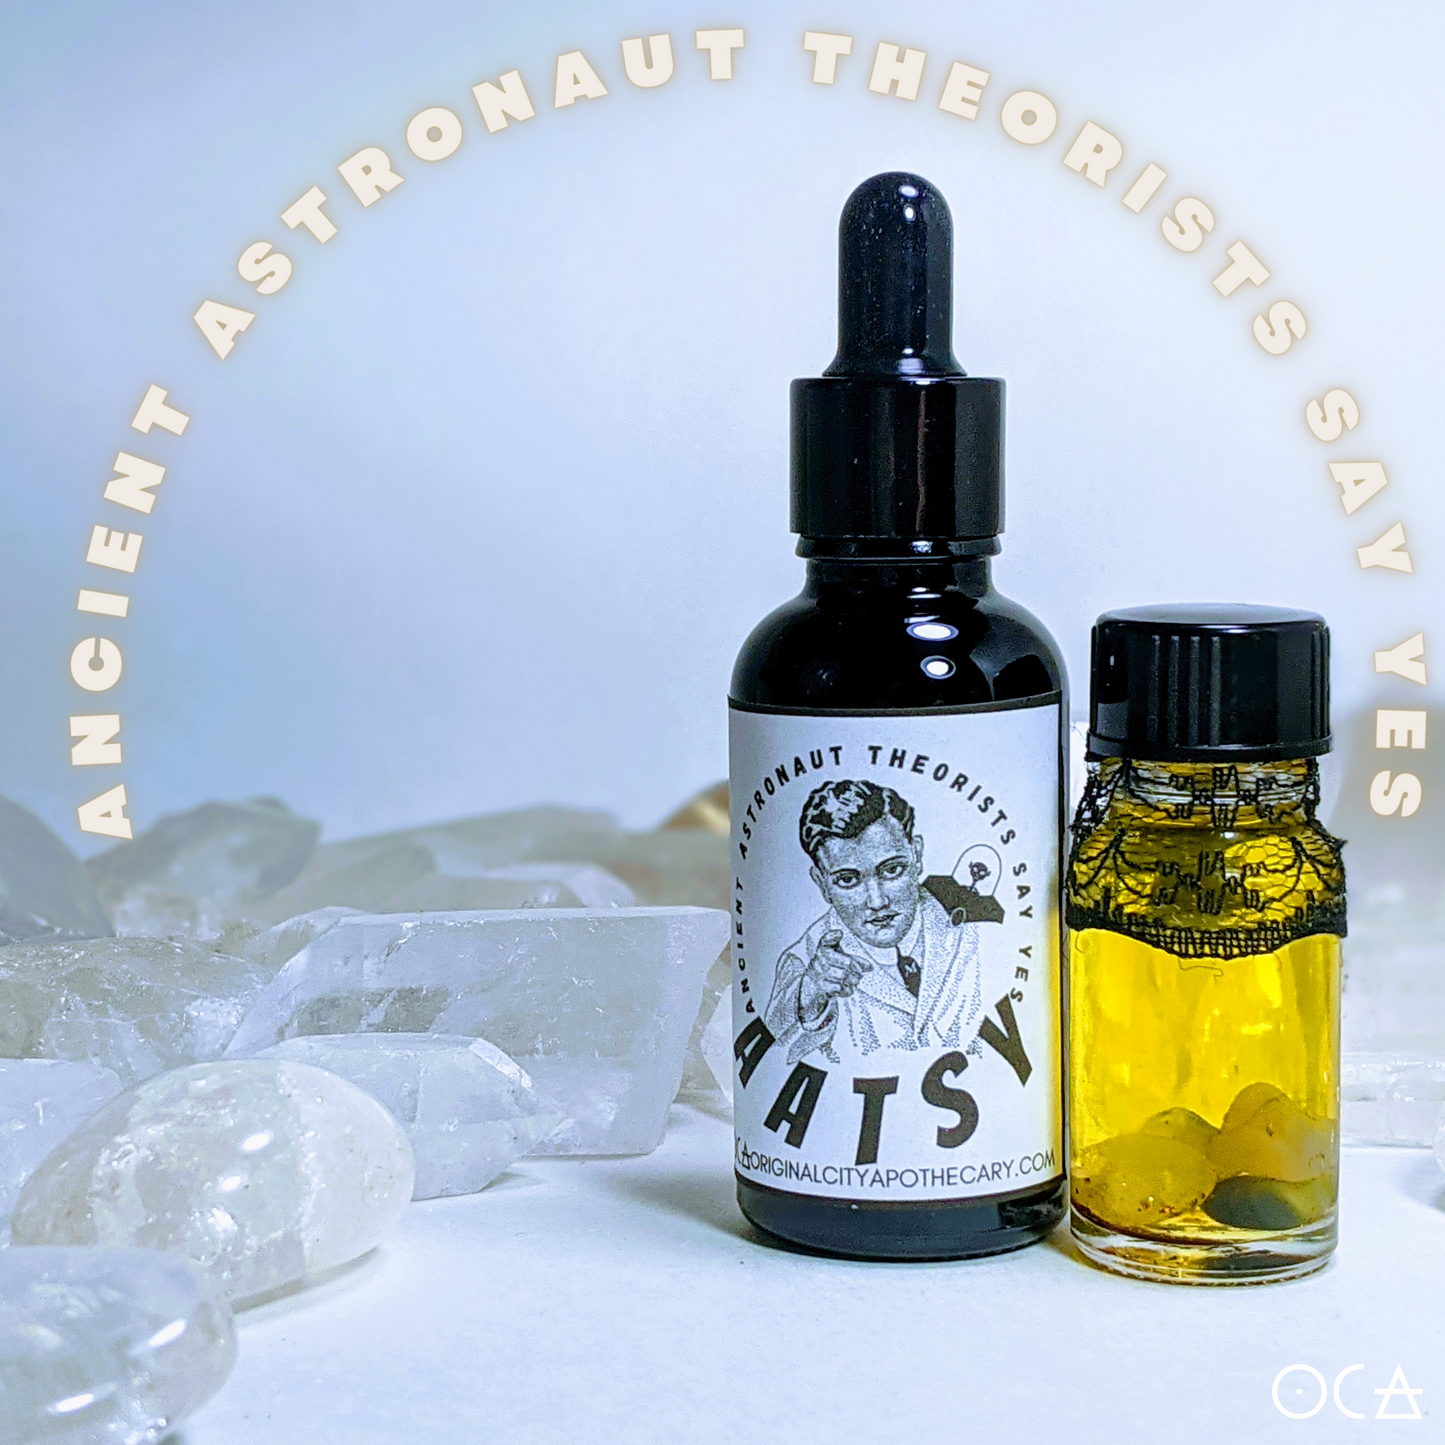 Ancient Astronaut Theorists Say Yes Unisexy Blend Oil/Perfume/Cologne